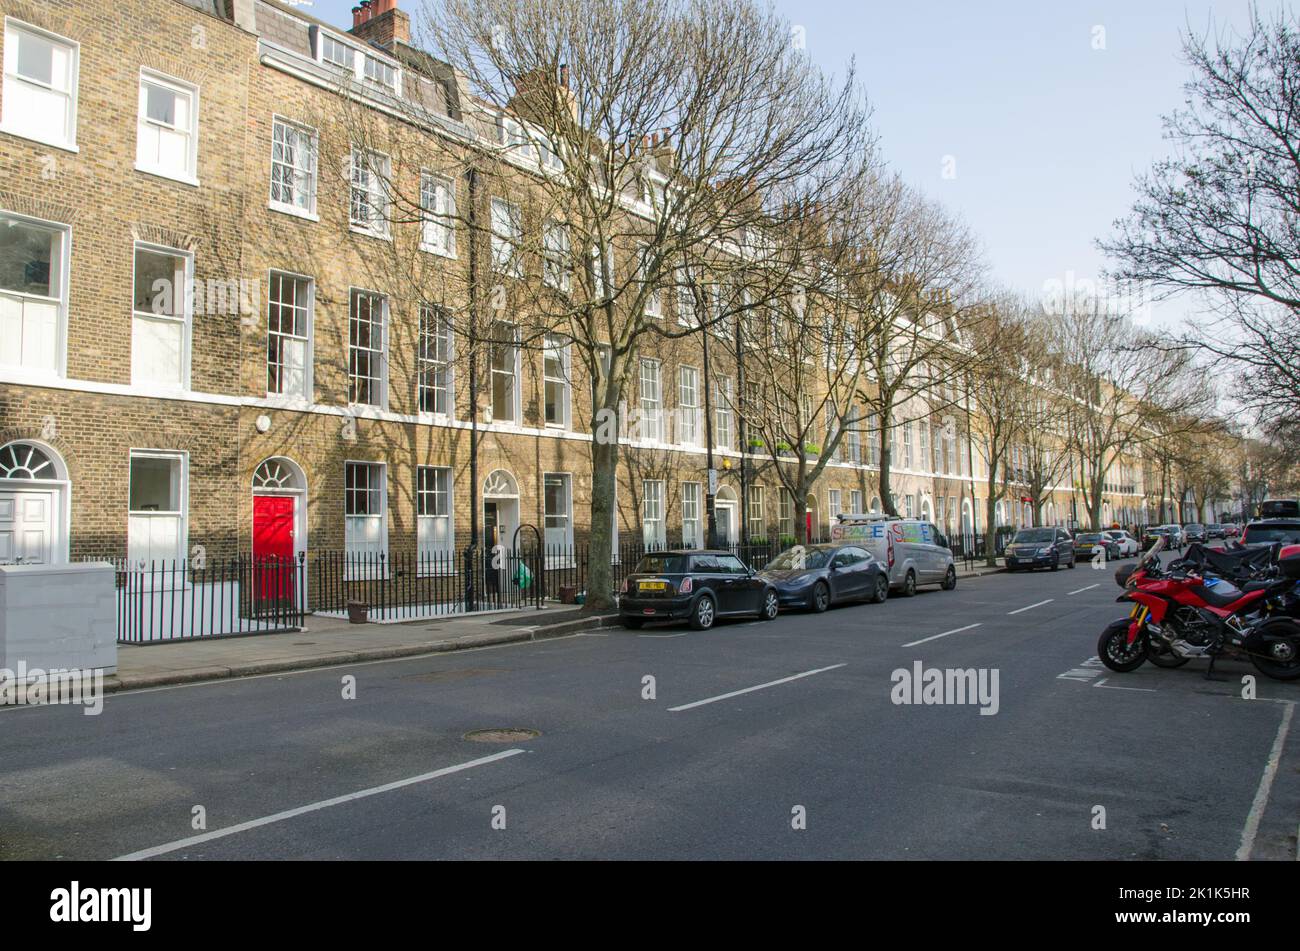 London, UK - March 21, 2022: View along the historic Doughty Street in Bloomsbury, Central London.  Home to many legal firms and media companies. Stock Photo